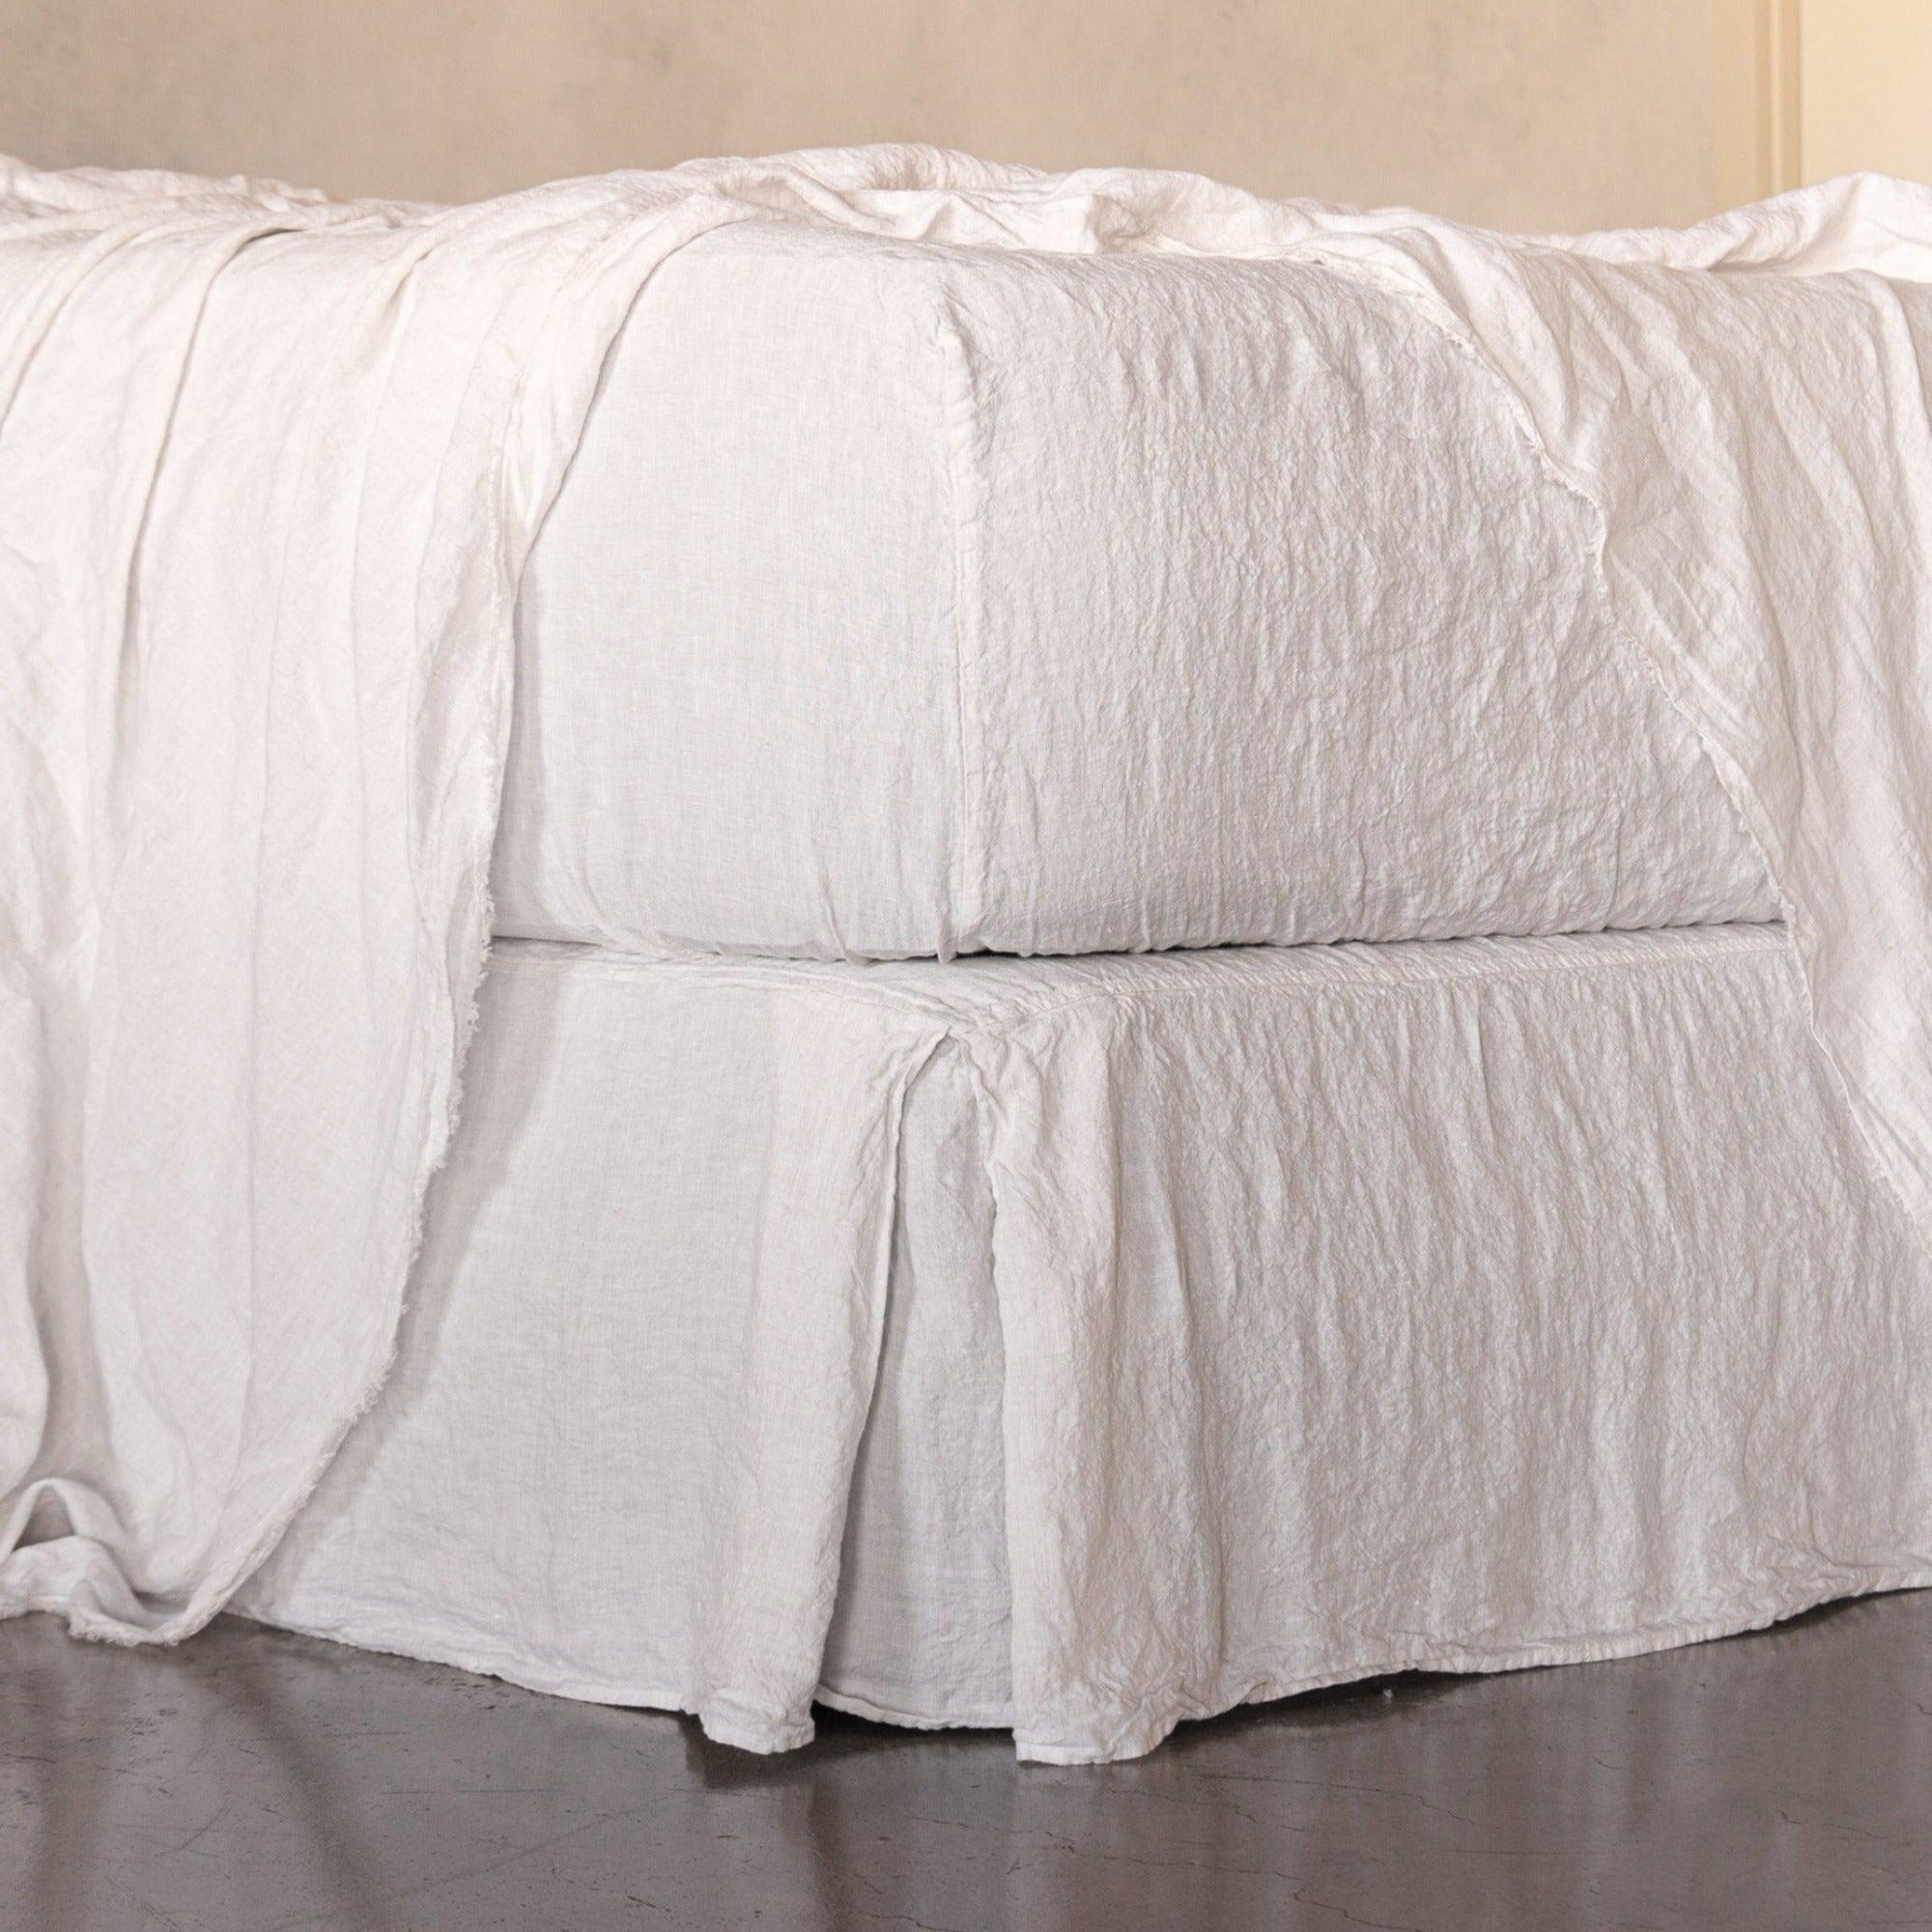  Linen Fitted Sheet | Pale Stone | Hale Mercantile Co.